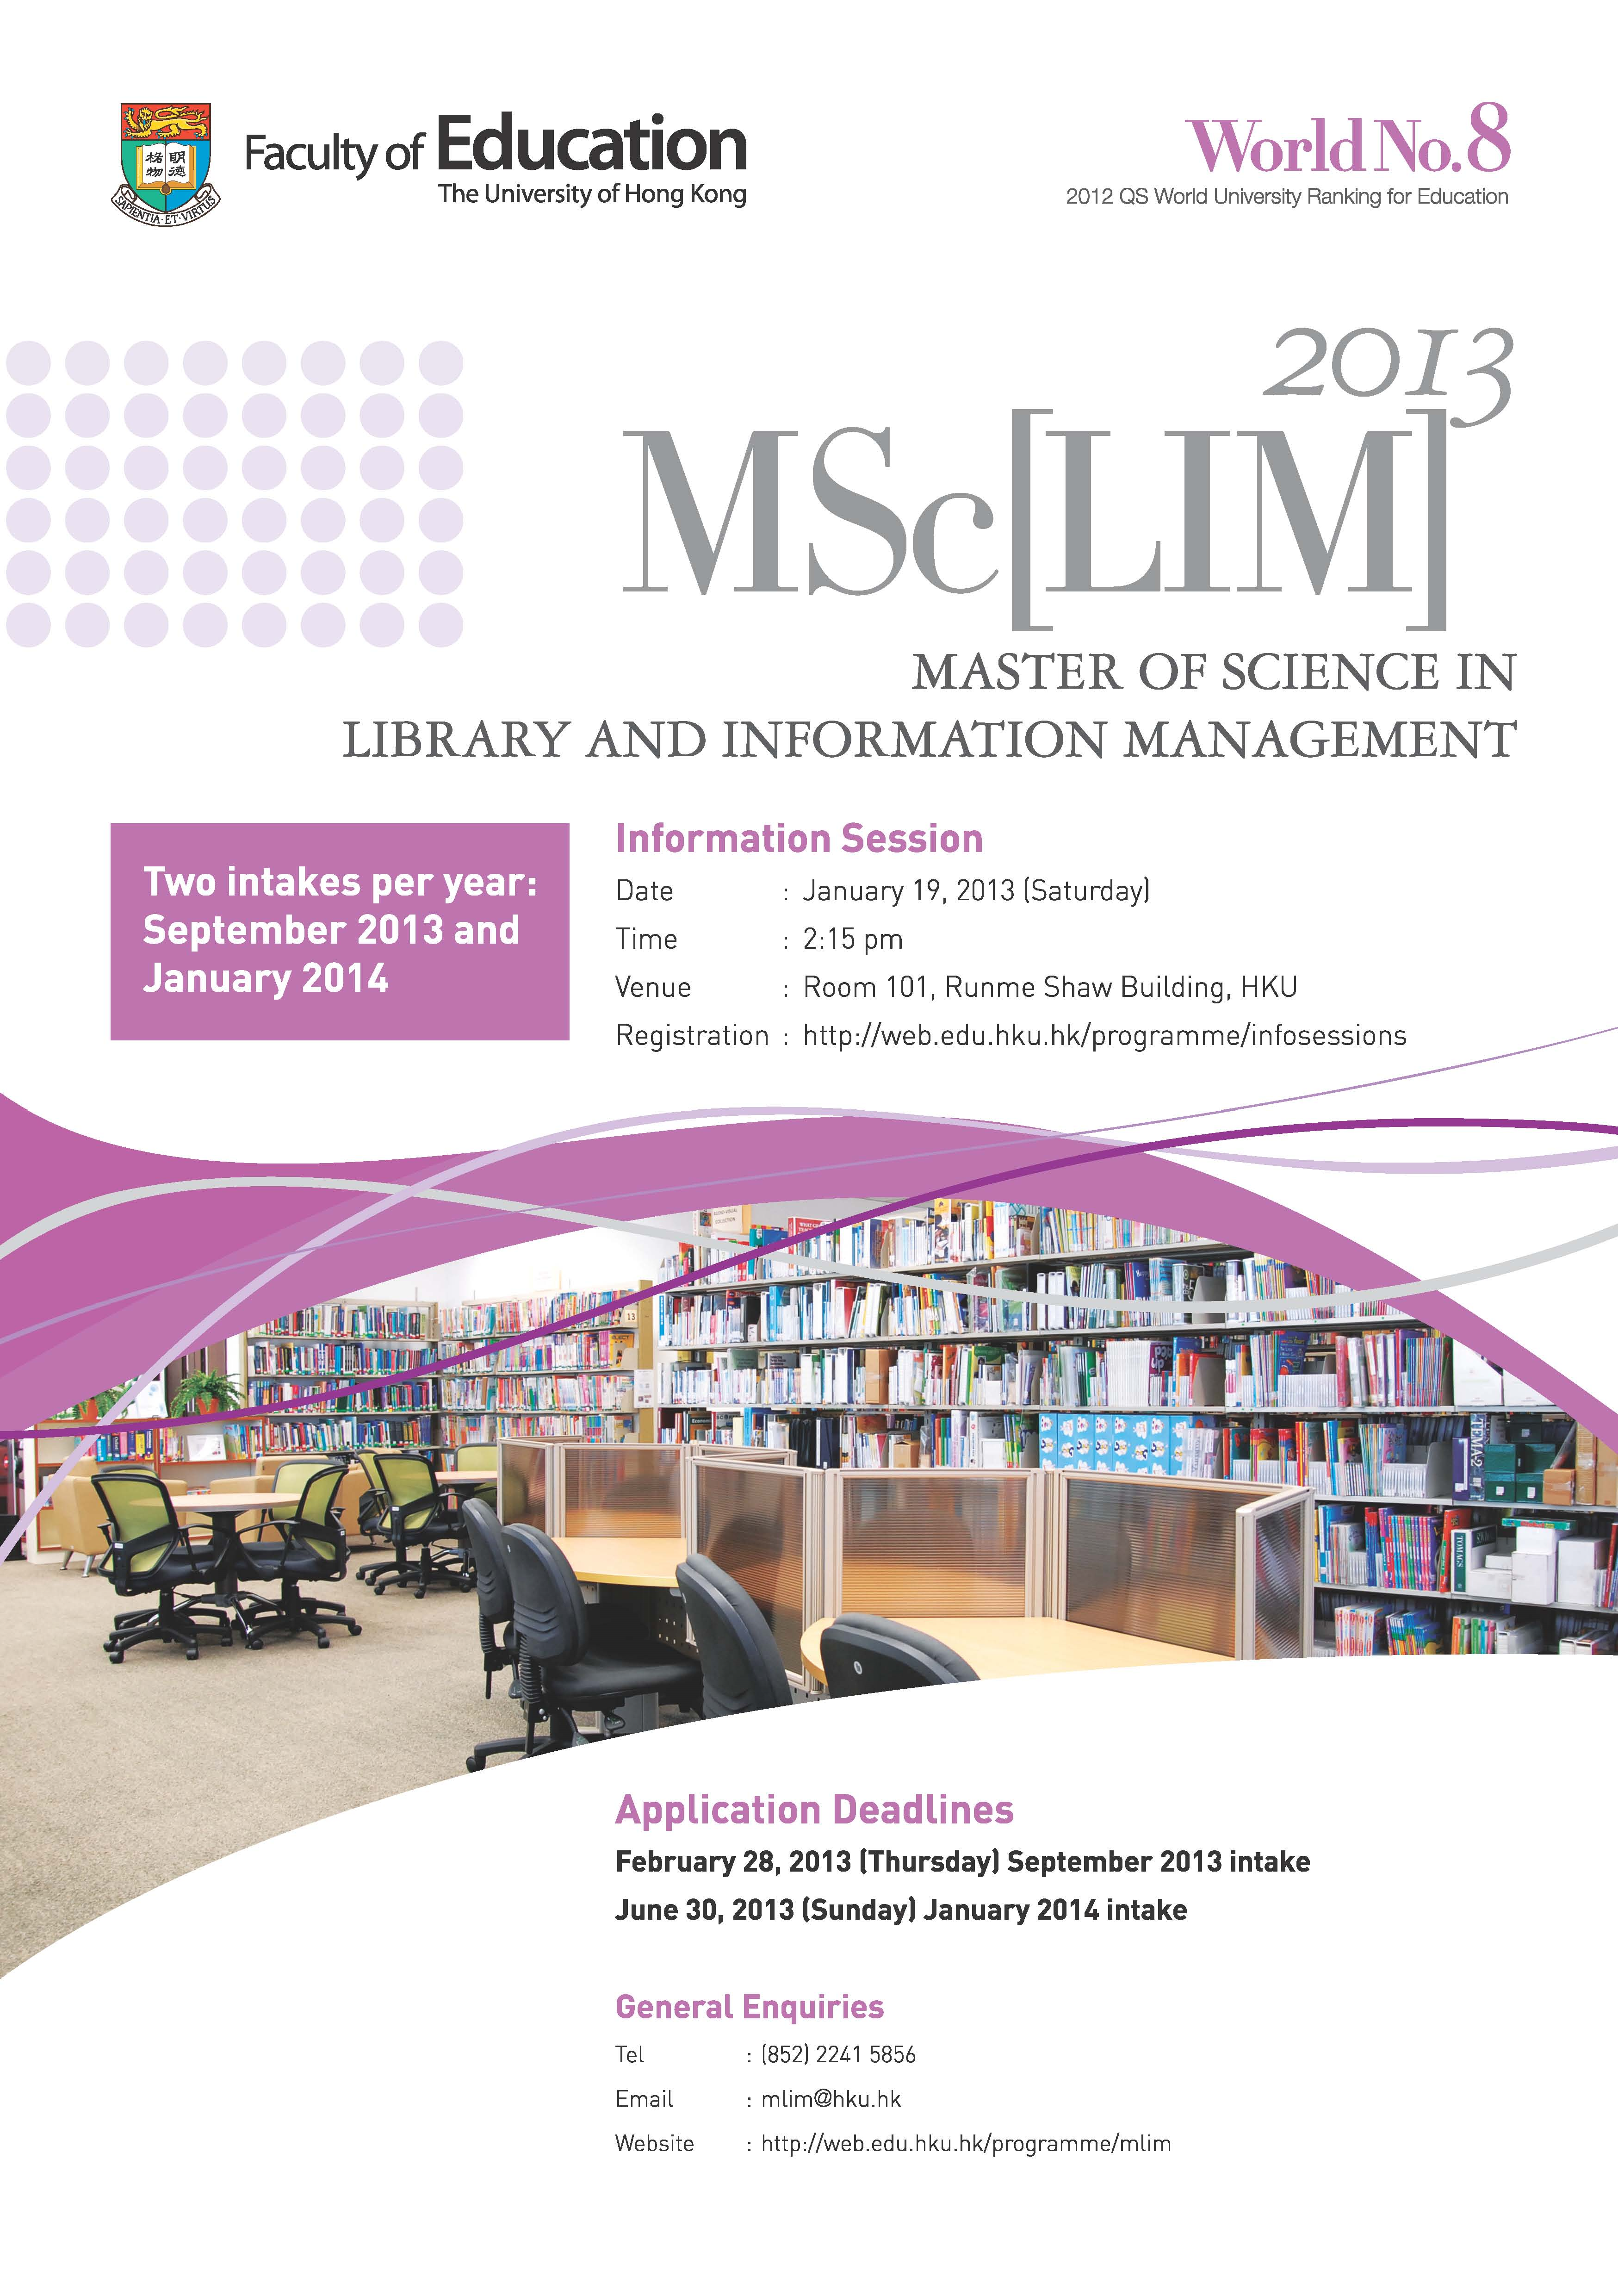 Information Session for Master of Science in Library and Information Management (MSc[LIM]) 